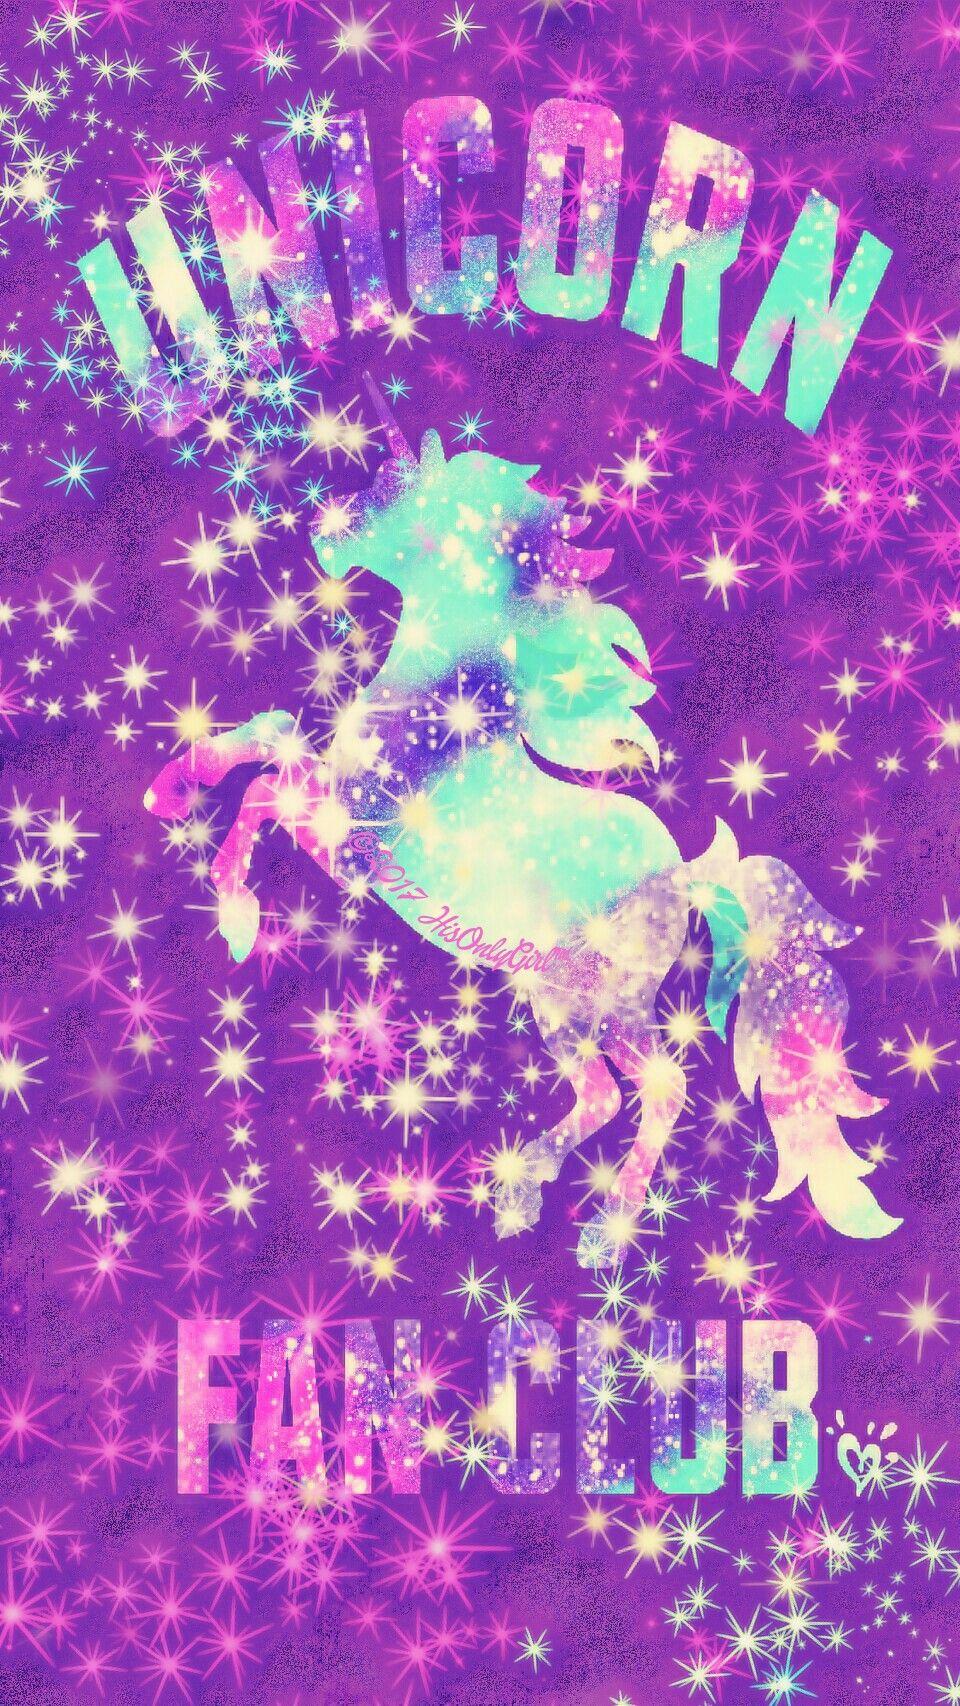 Unicorn Fan Club Sparkle Galaxy IPhone Android Wallpaper I